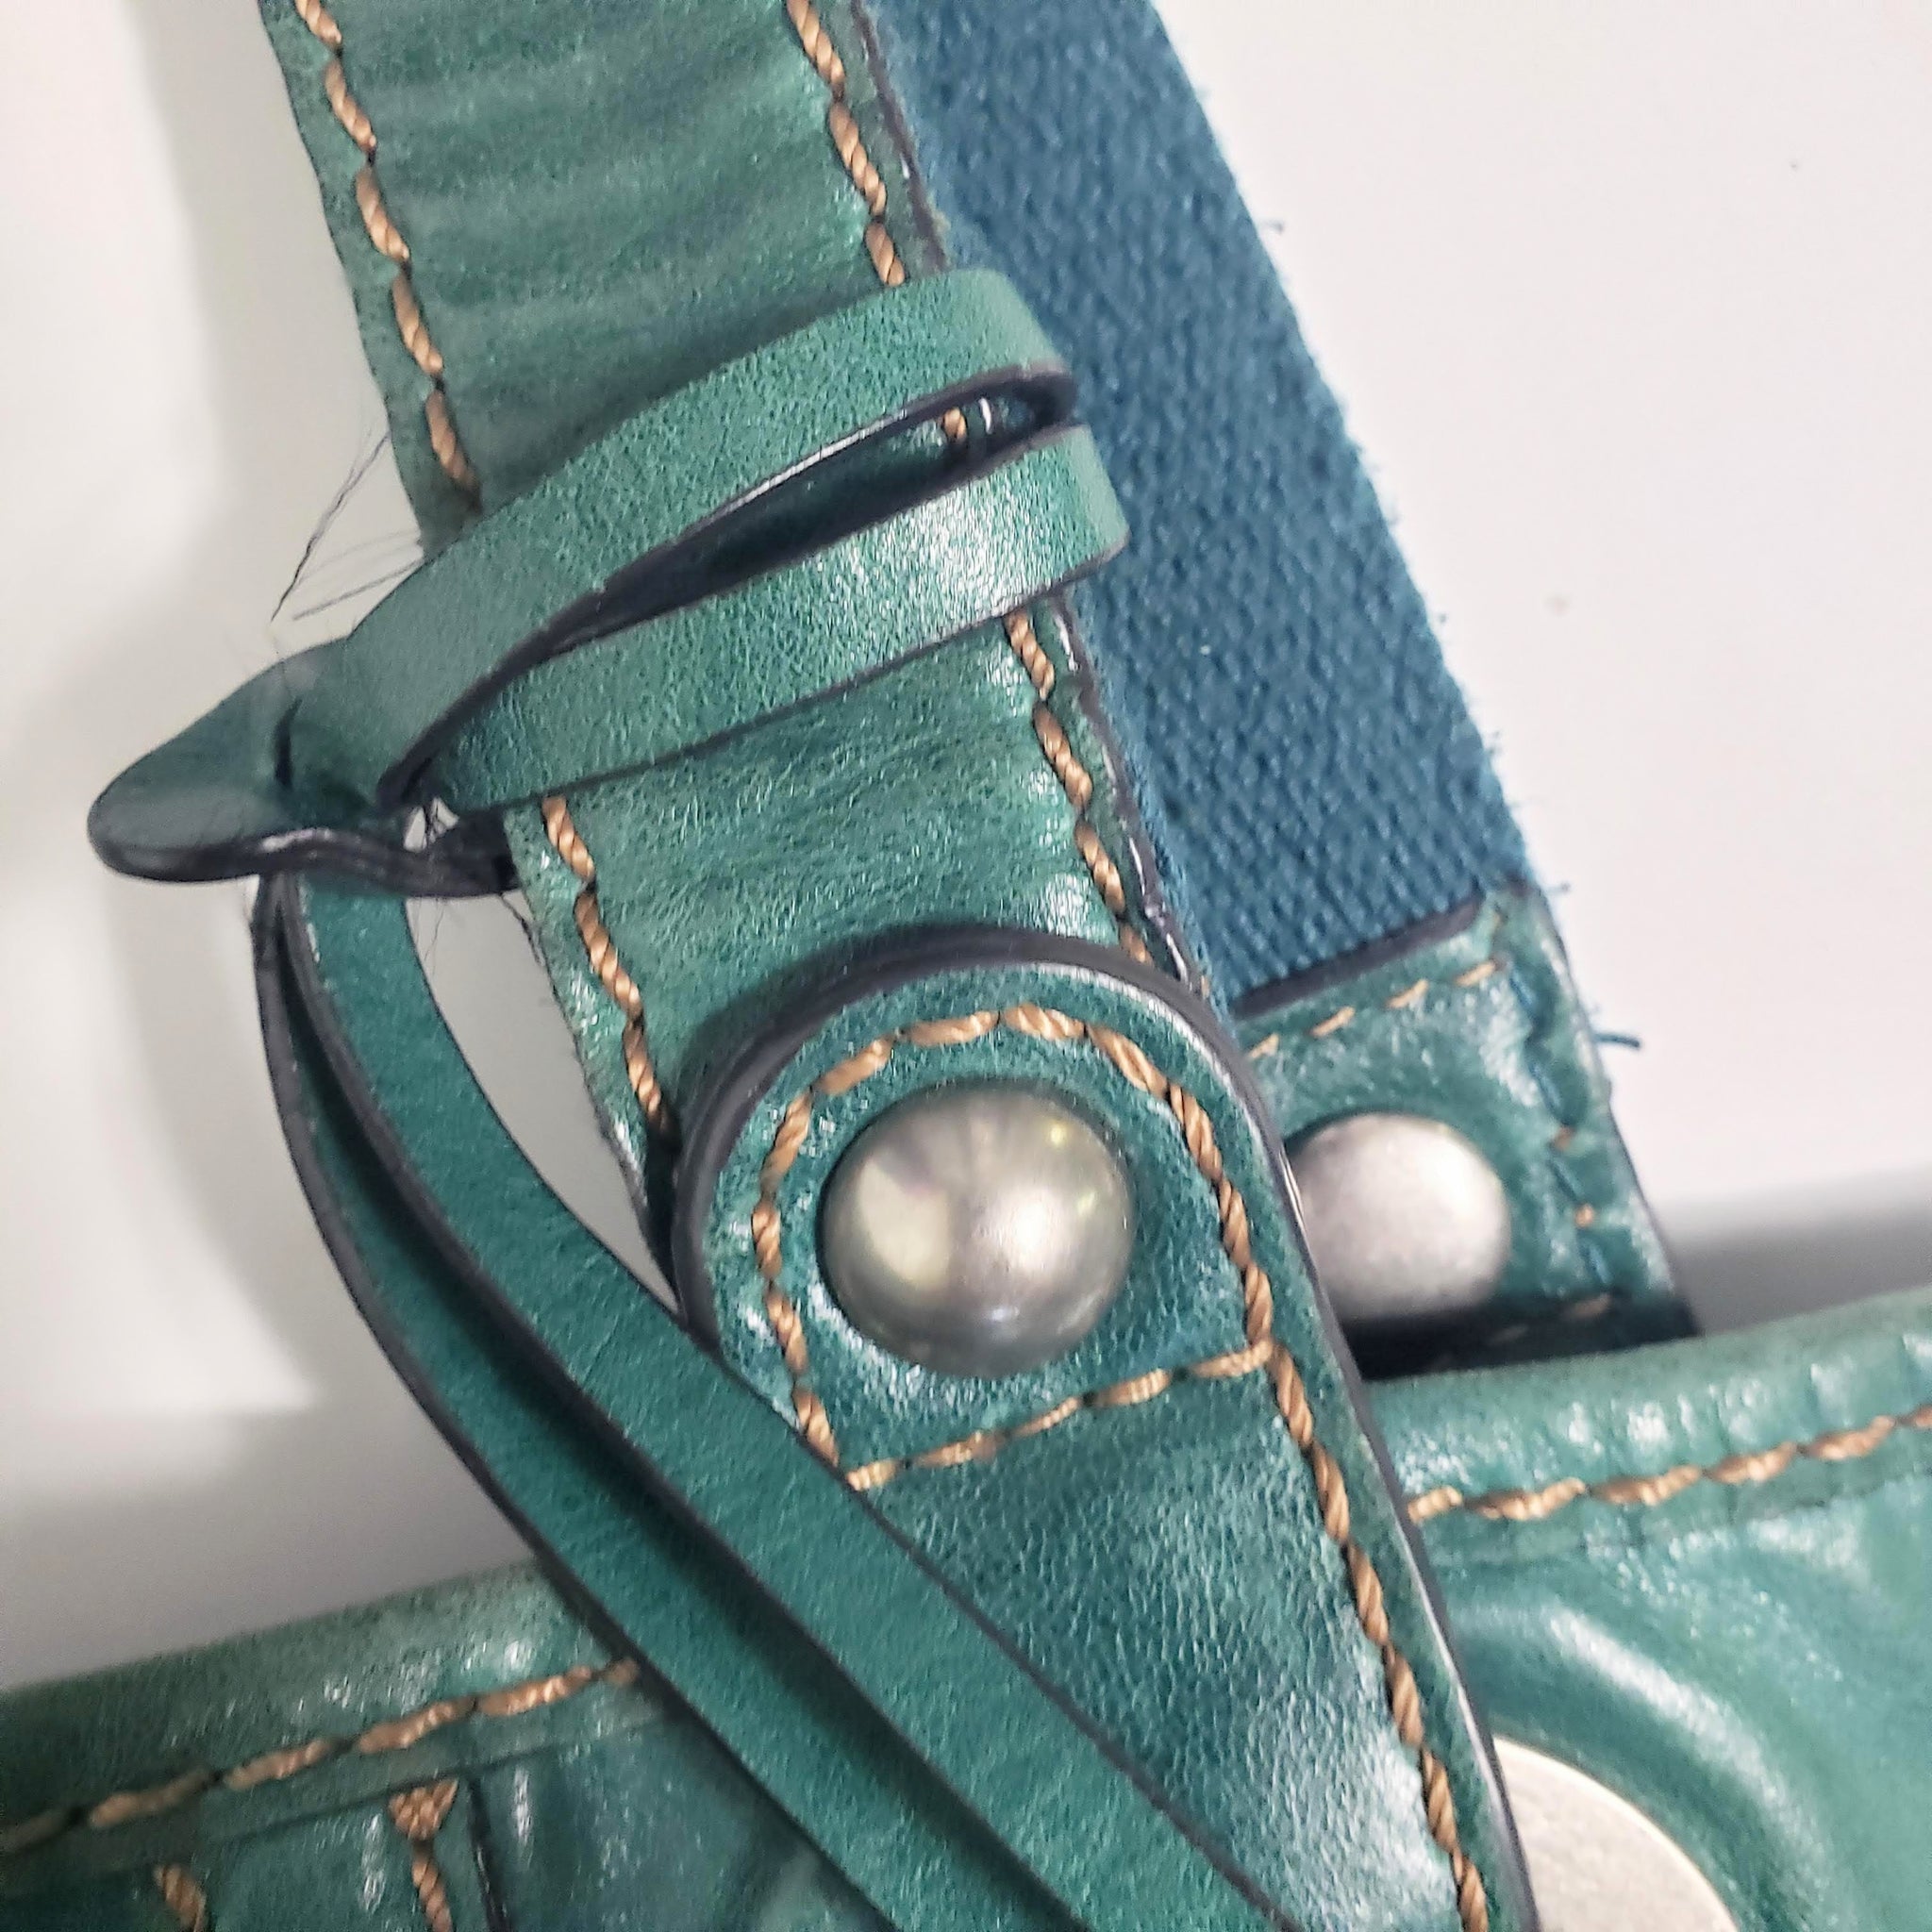 Fossil Hathaway Tote Bag Green